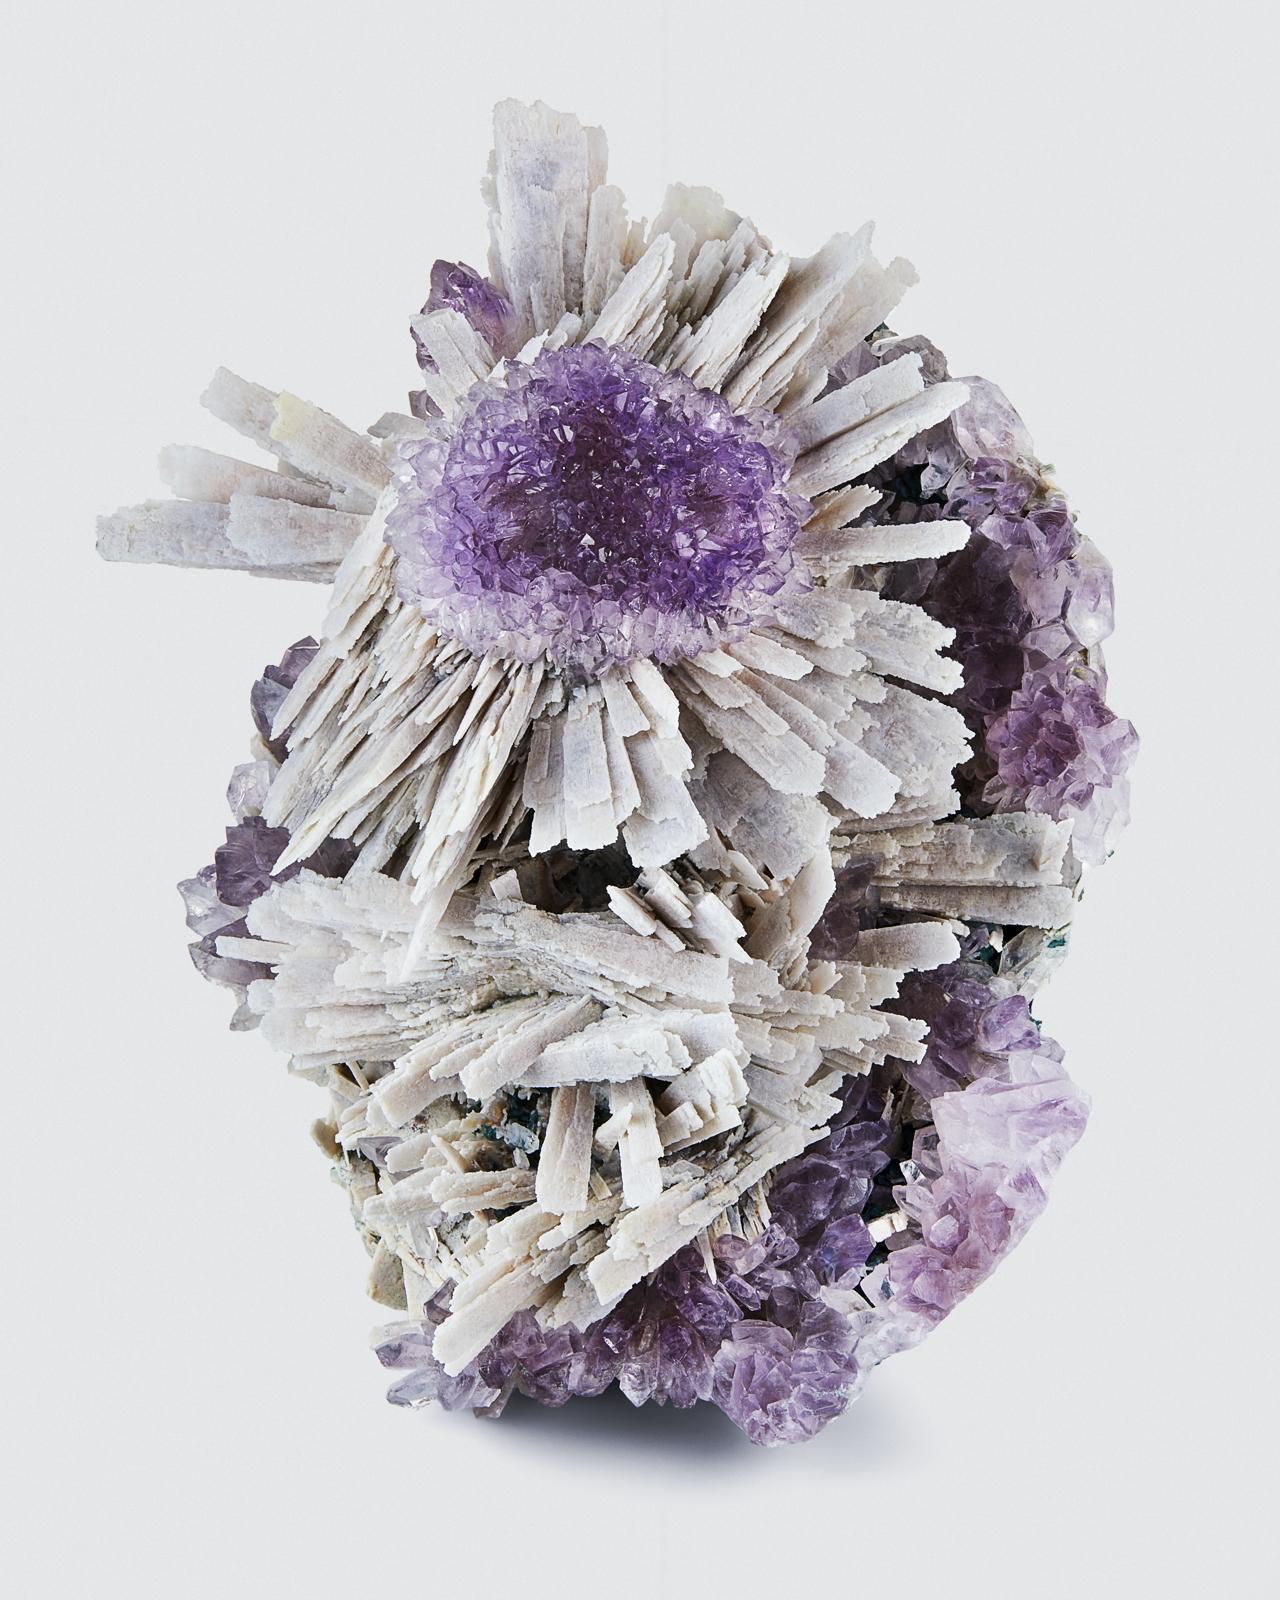 Amethyst with Quartz Pseudomorph Anhydrite, Rio Grande do Sul, Brazil

Superb bright Amethyst surrounded by an explosion of bladed Quartz after Anhydrite crystals.